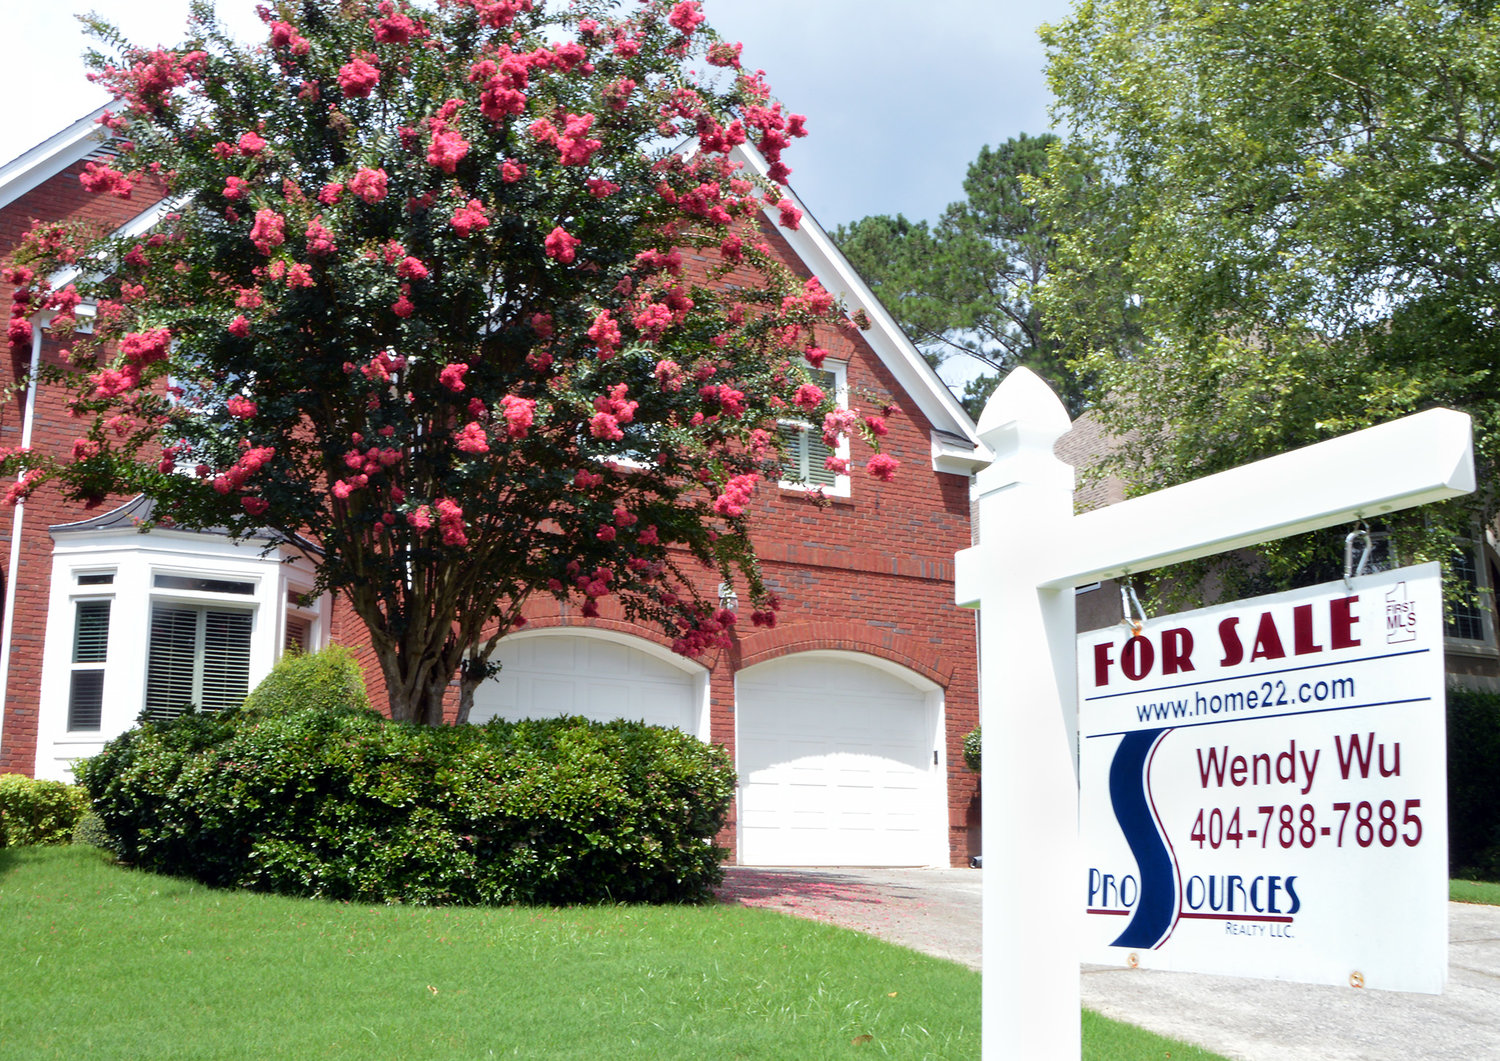 A "For Sale" sign stands in front of a home in Marietta, Ga., July 20, 2022. (Christian Index/Henry Durand, File)